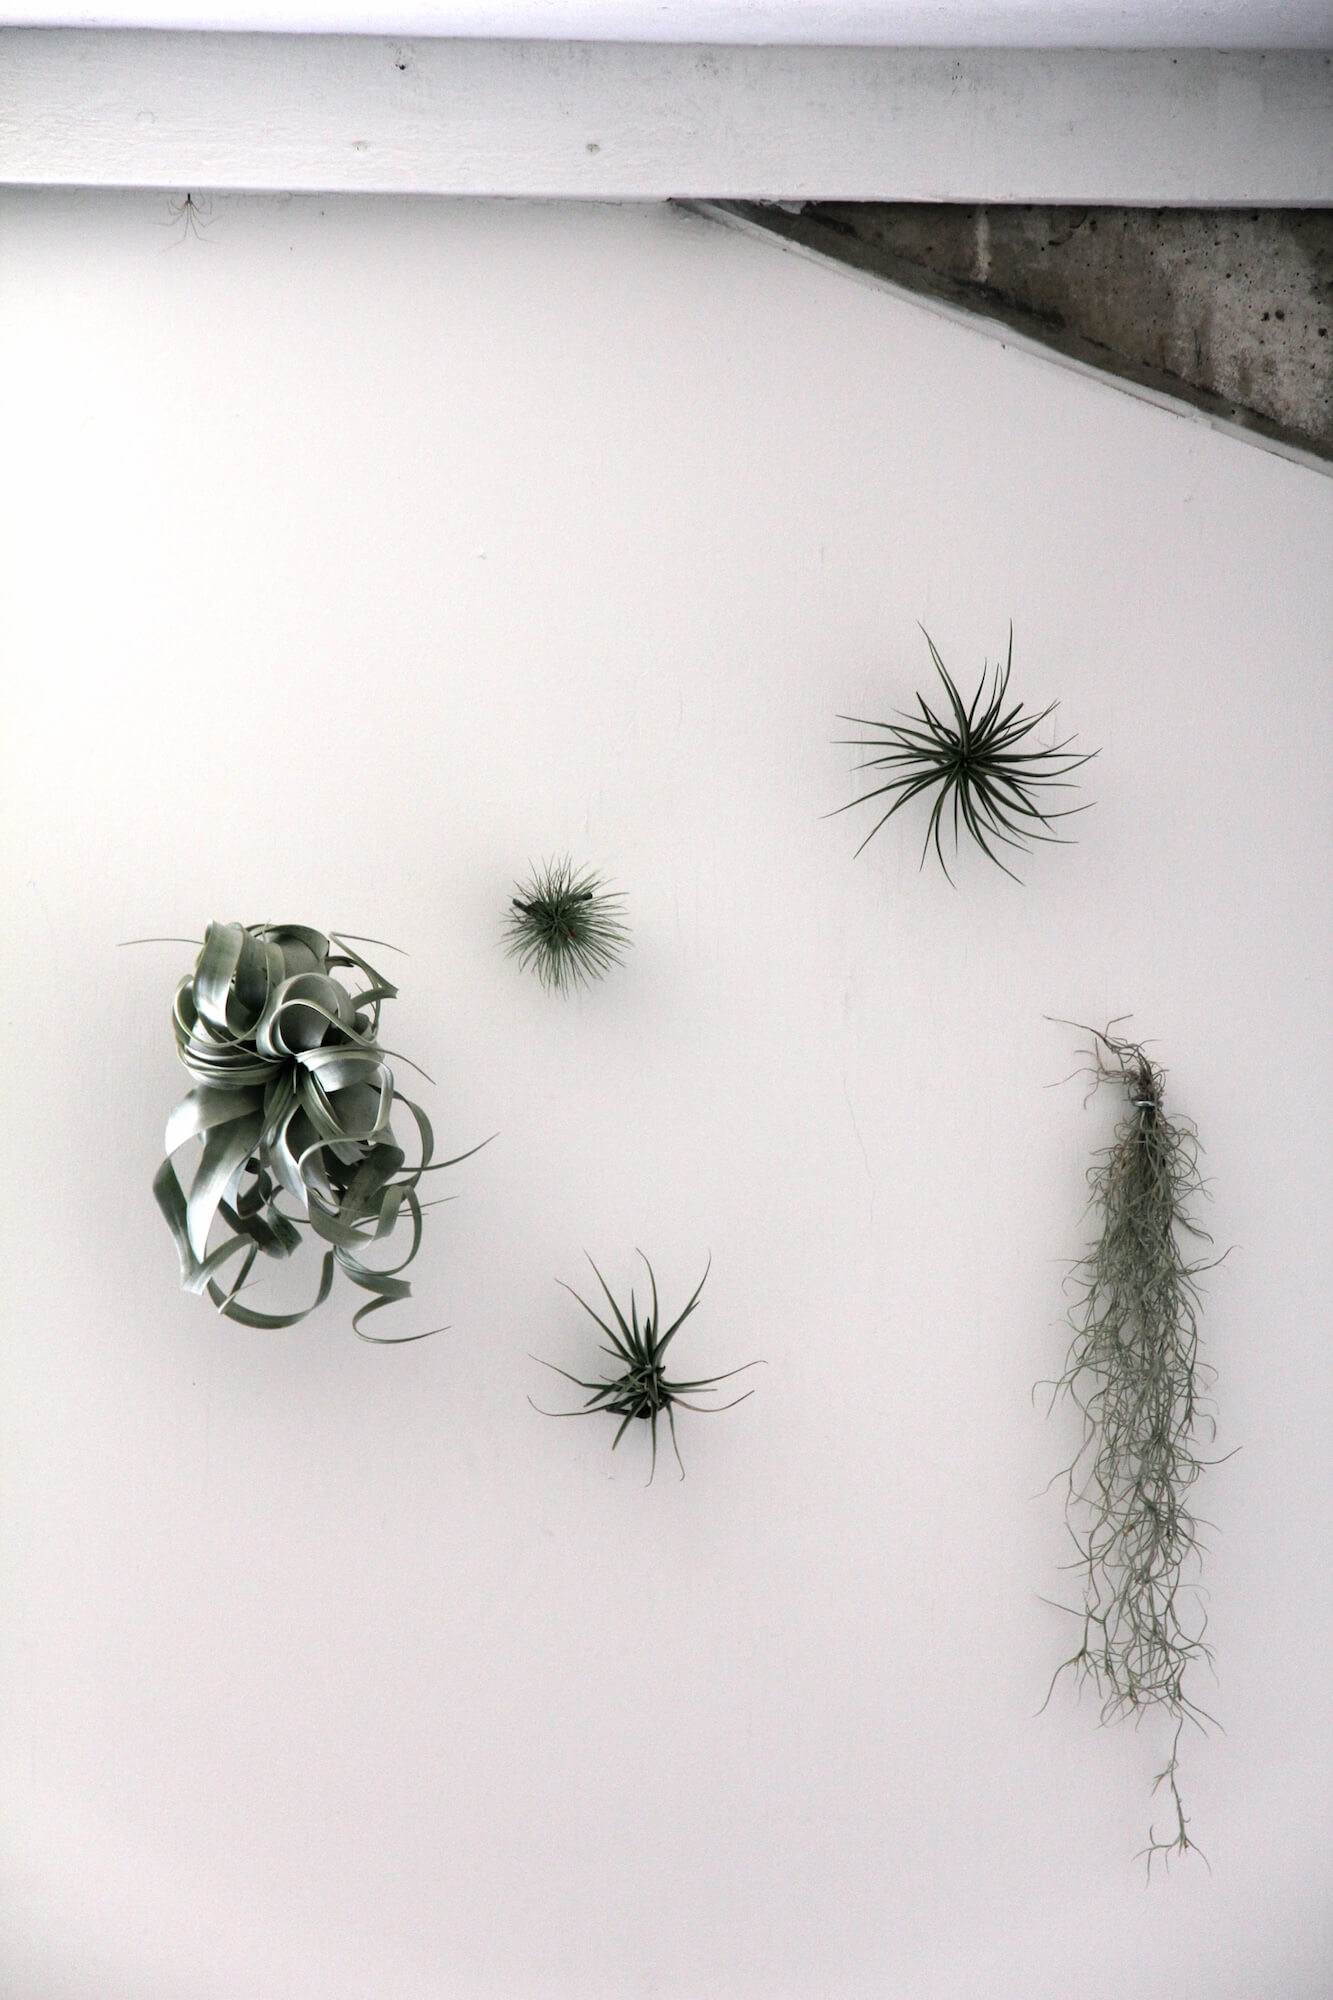 air plants growing out of an interior white wall